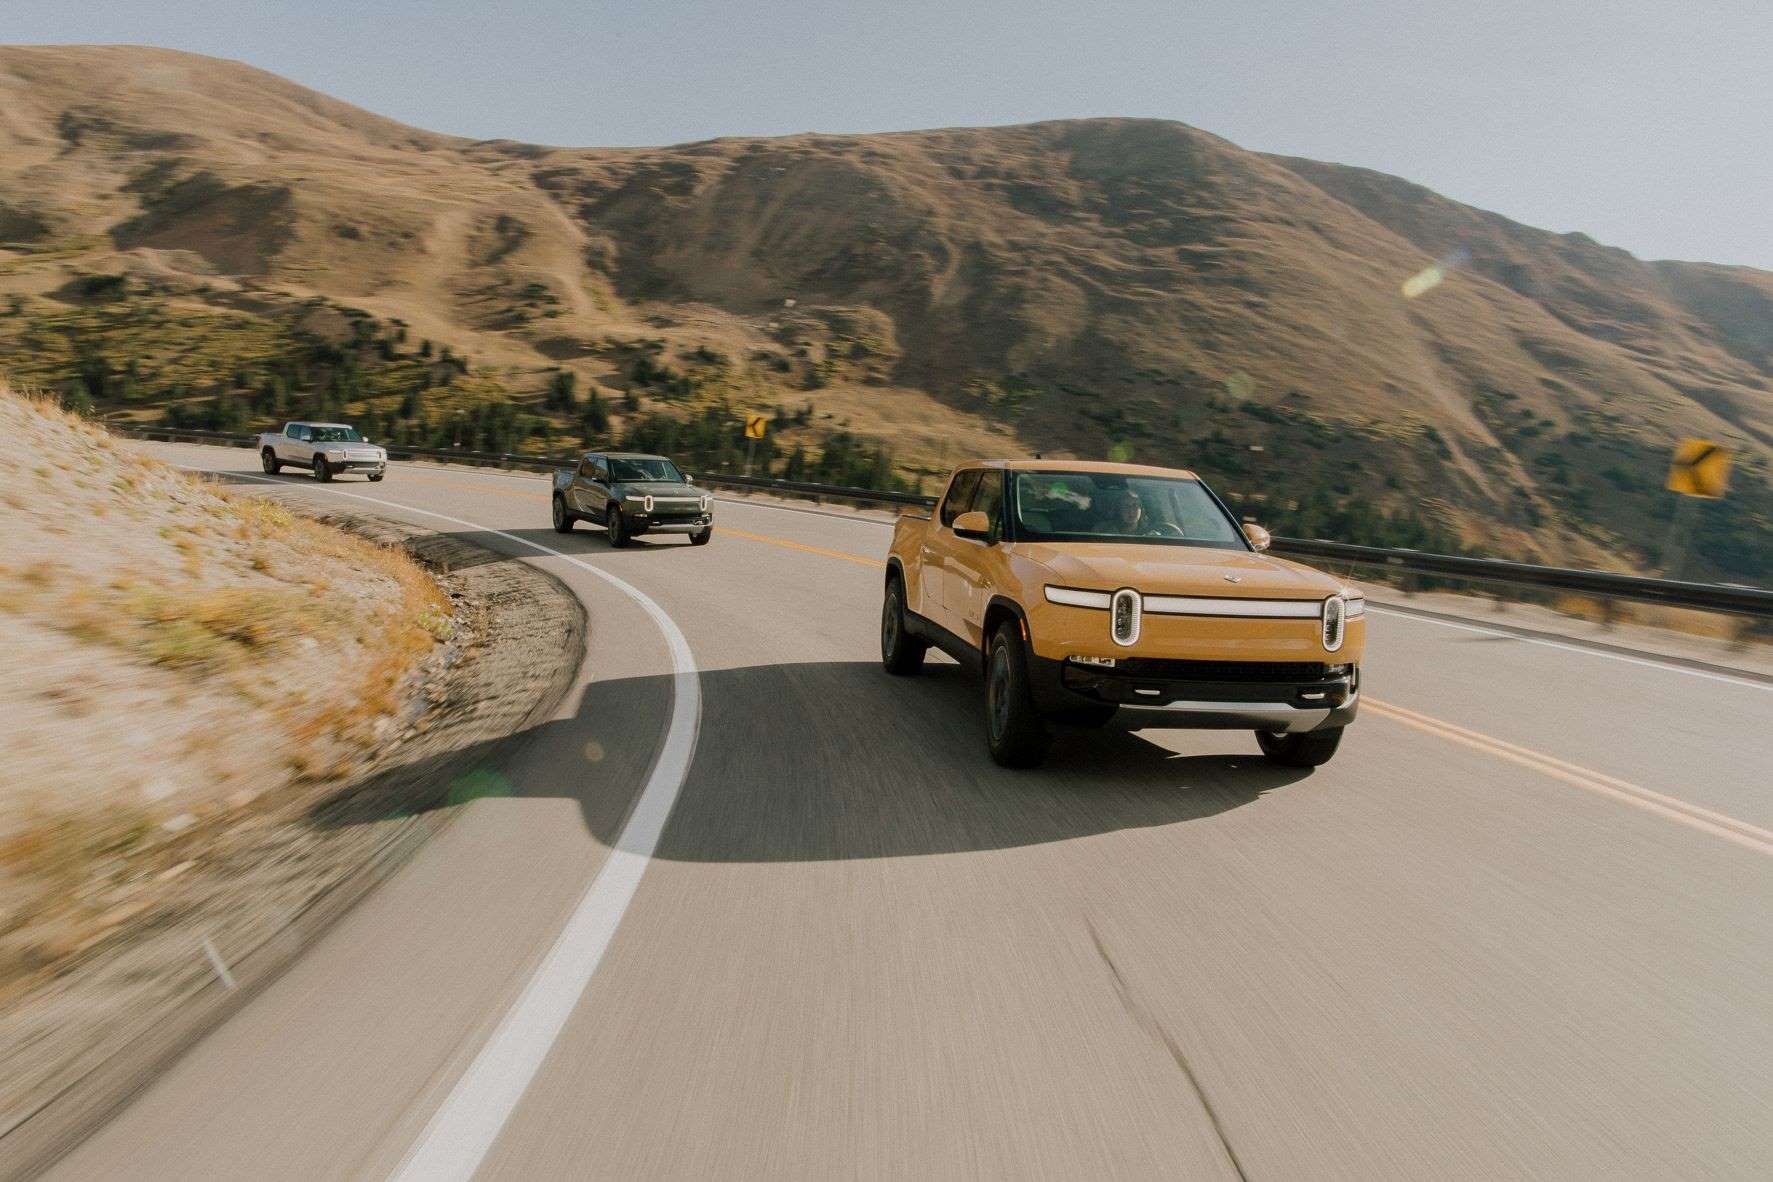 Three 2022 Rivian R1T electric pickup trucks driving on a mountain road